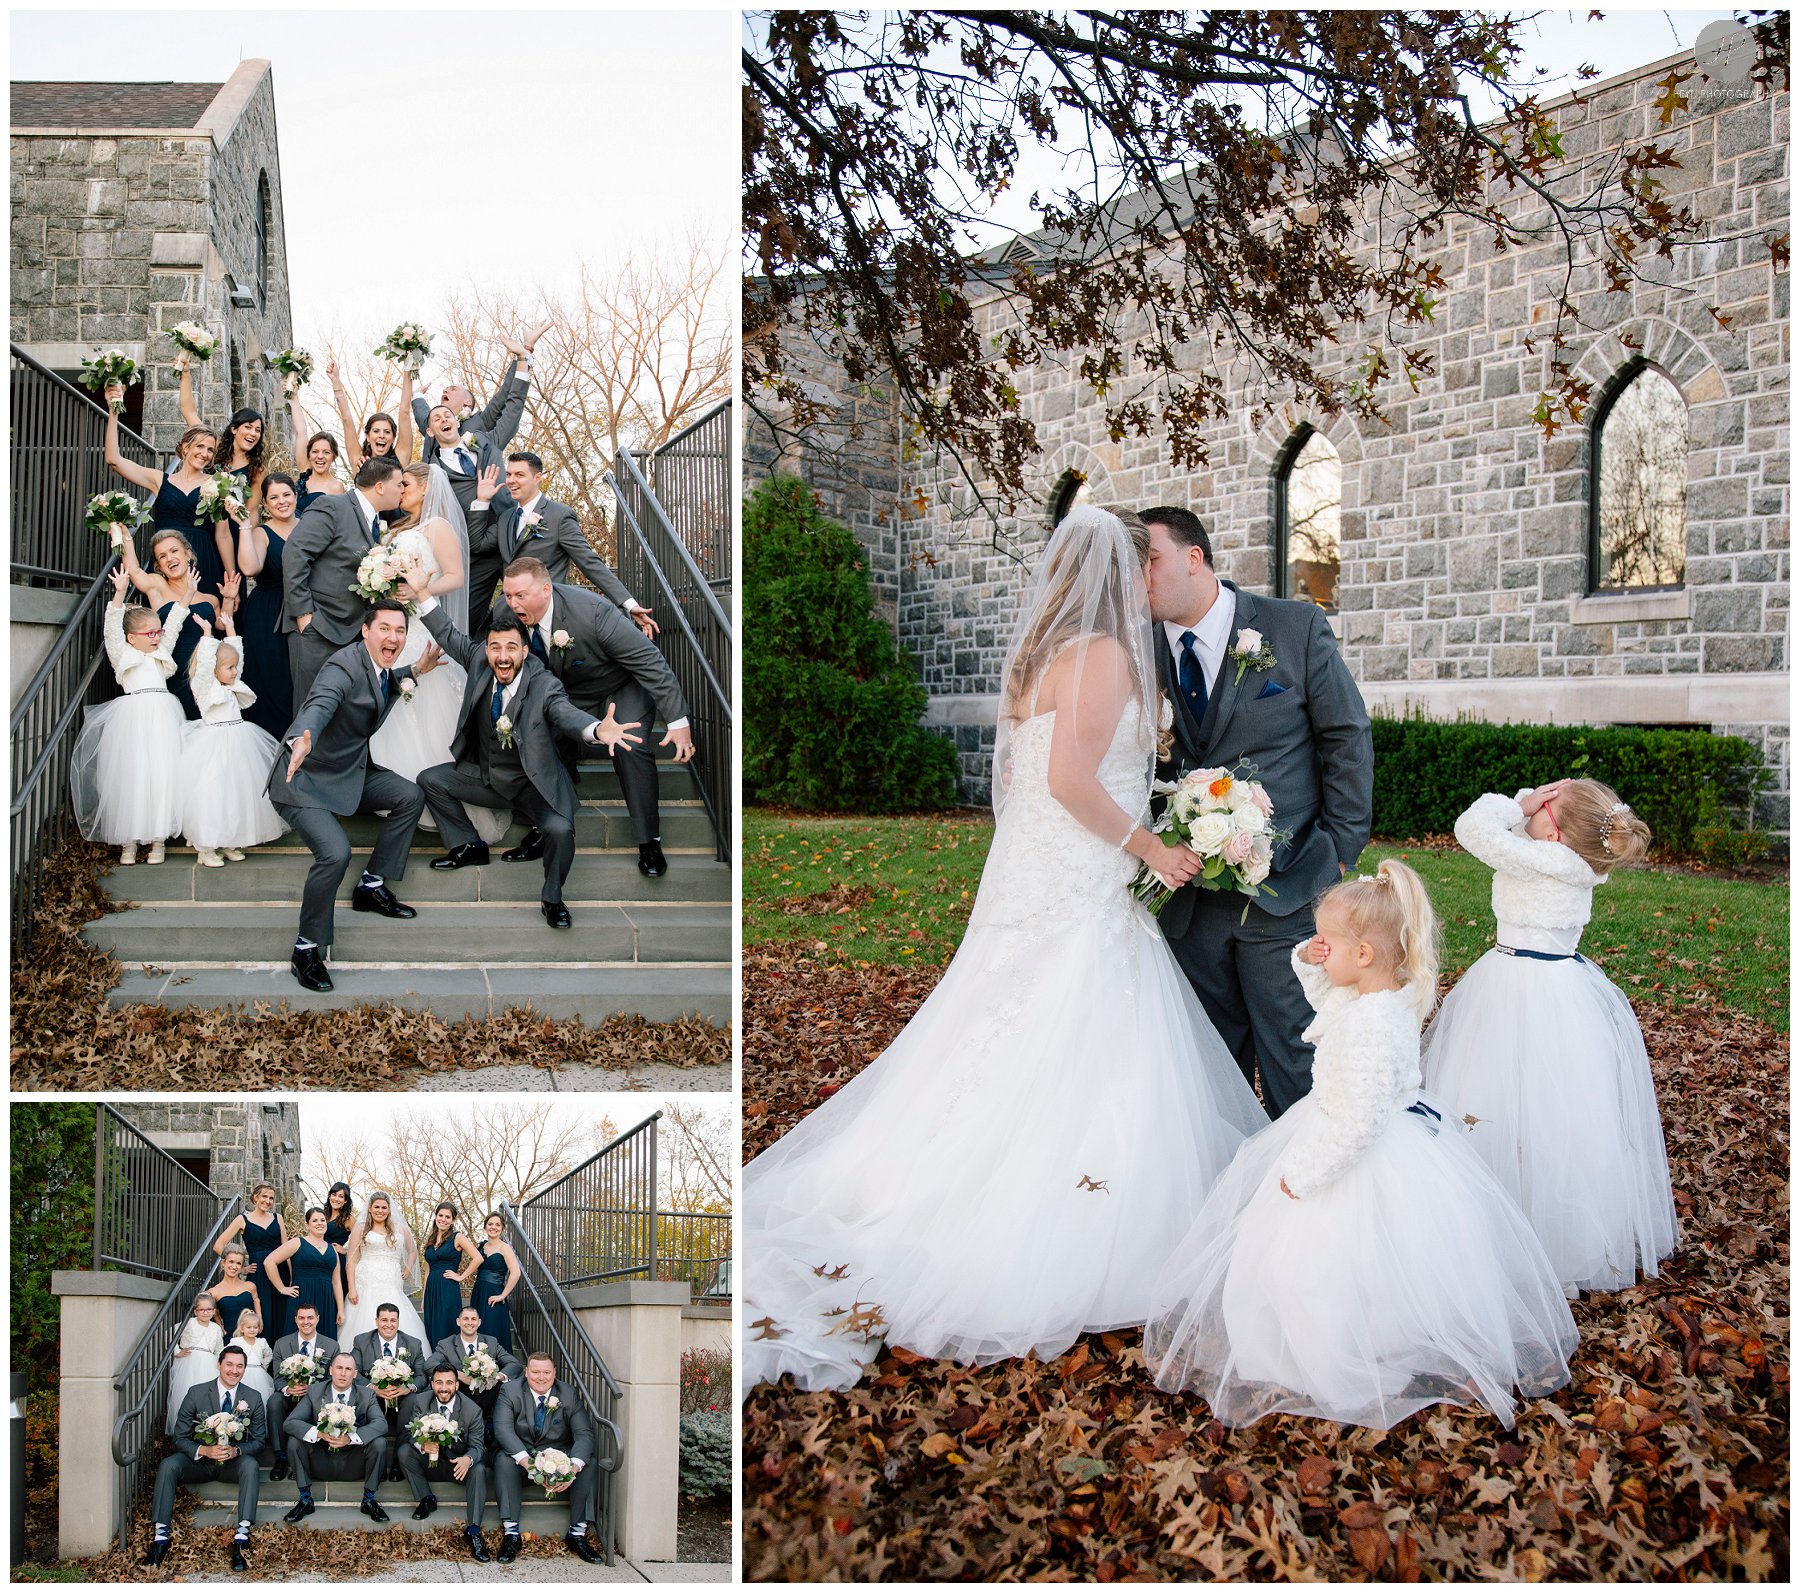 bridal party outside church ceremony before south gate manor wedding in new jersey